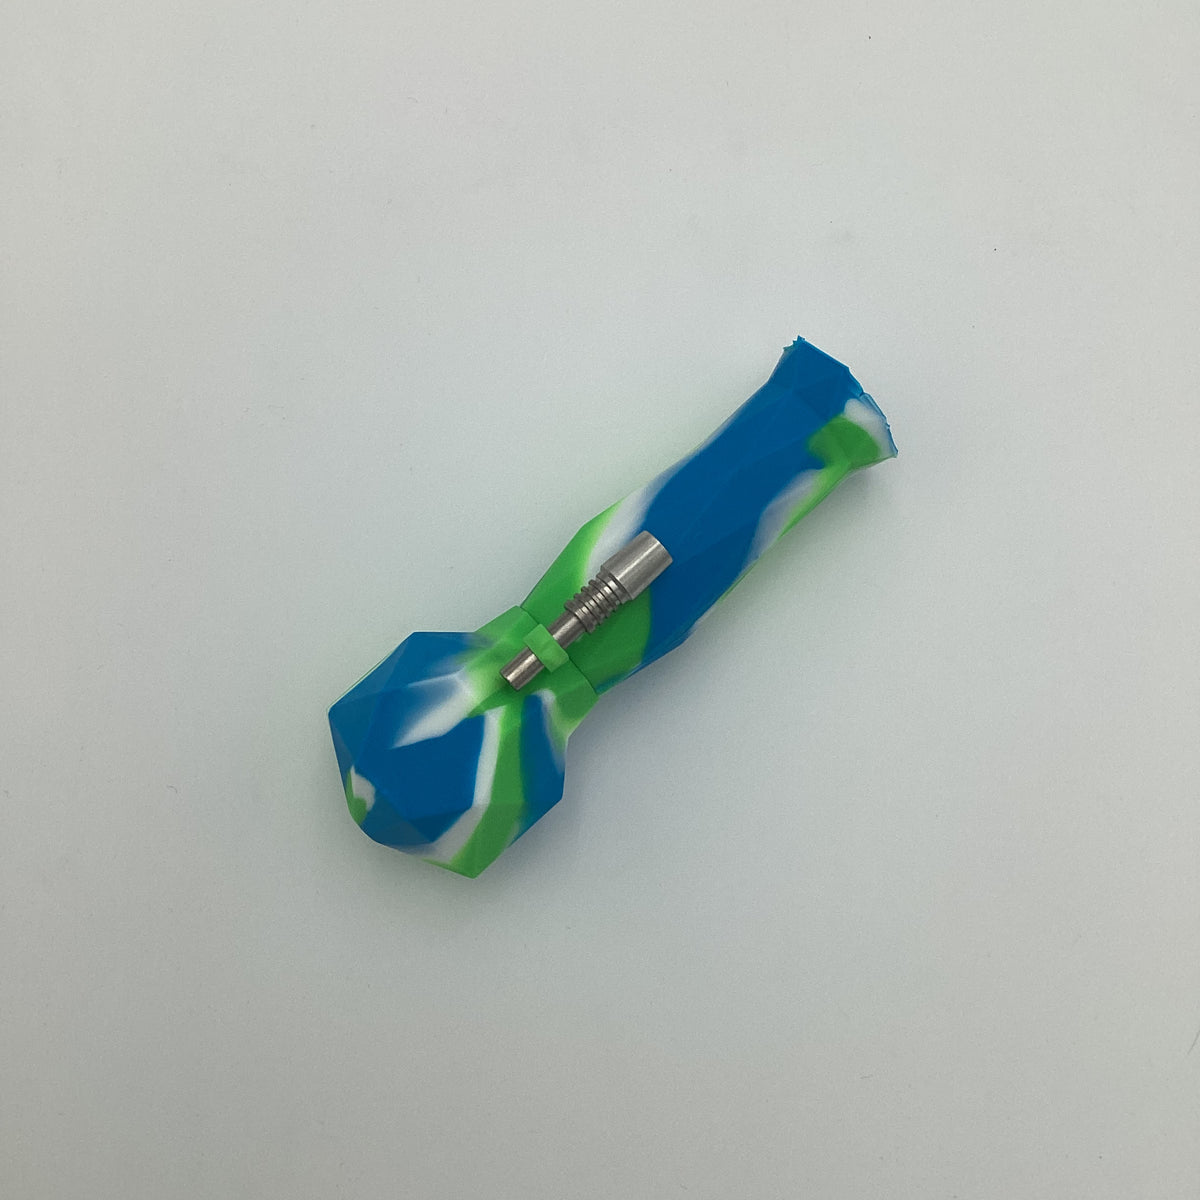 WaxMaid Silicone Spoon/Straw 2in1